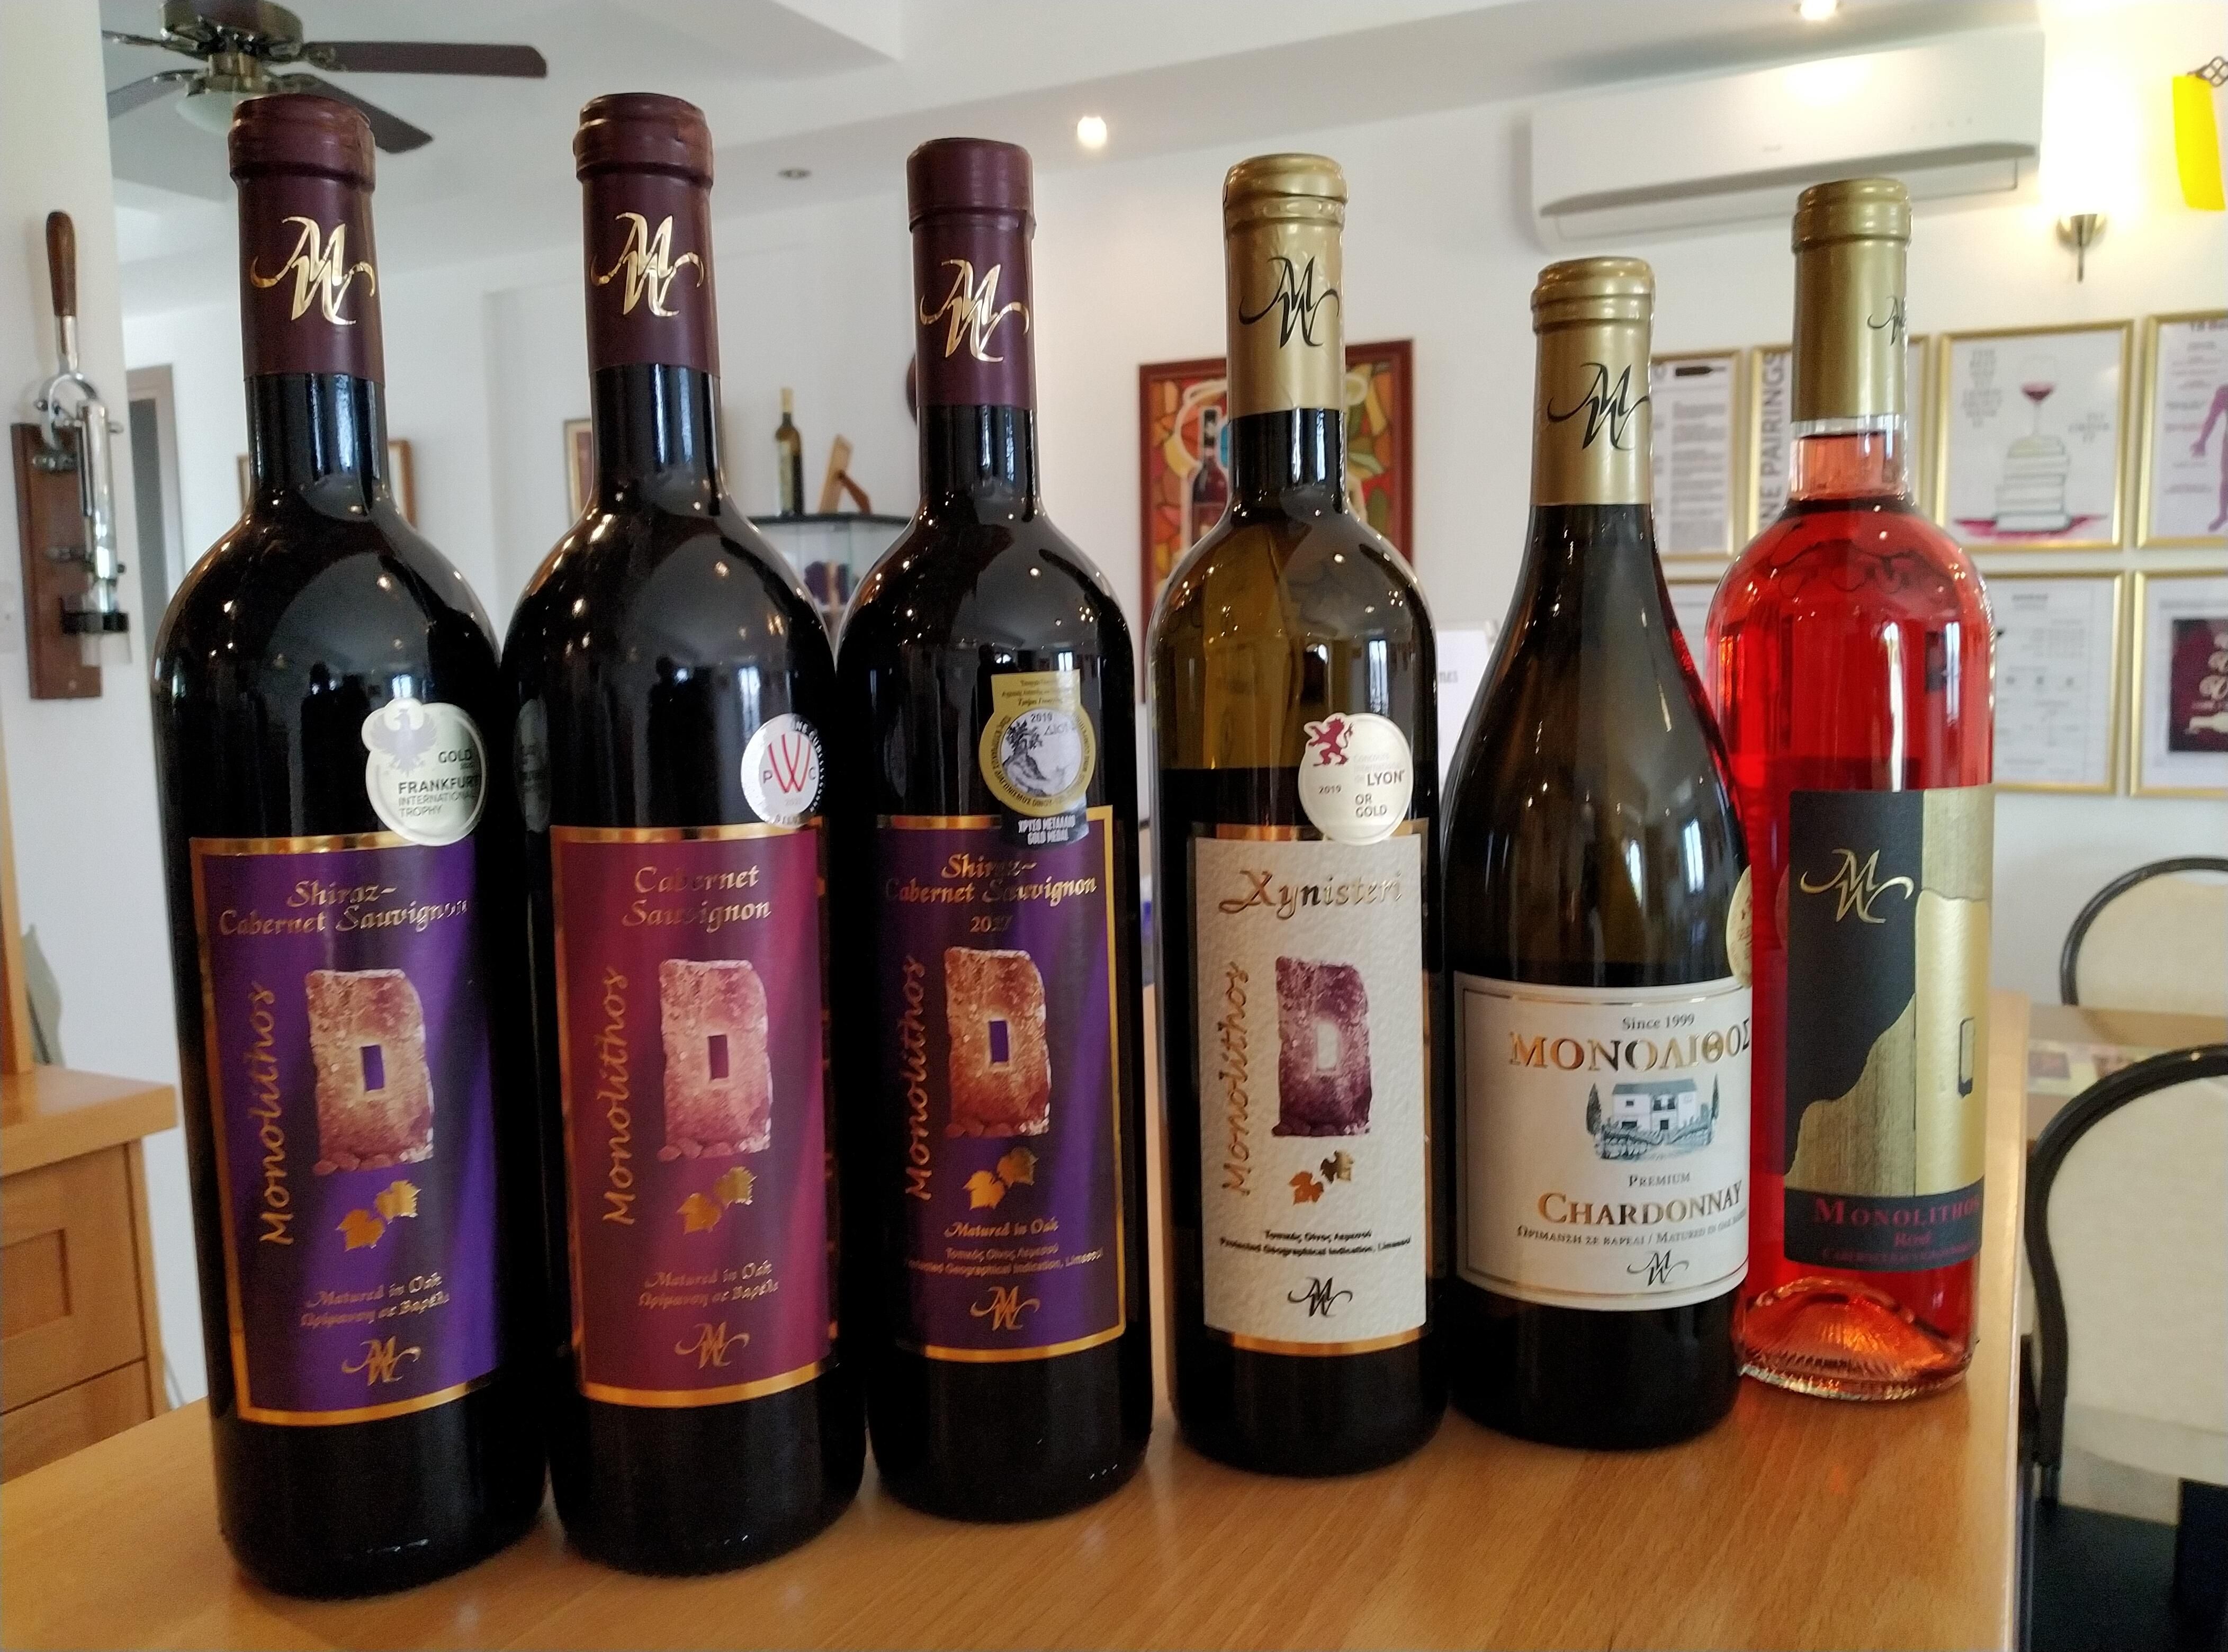 Set of wines from "Monolithos"